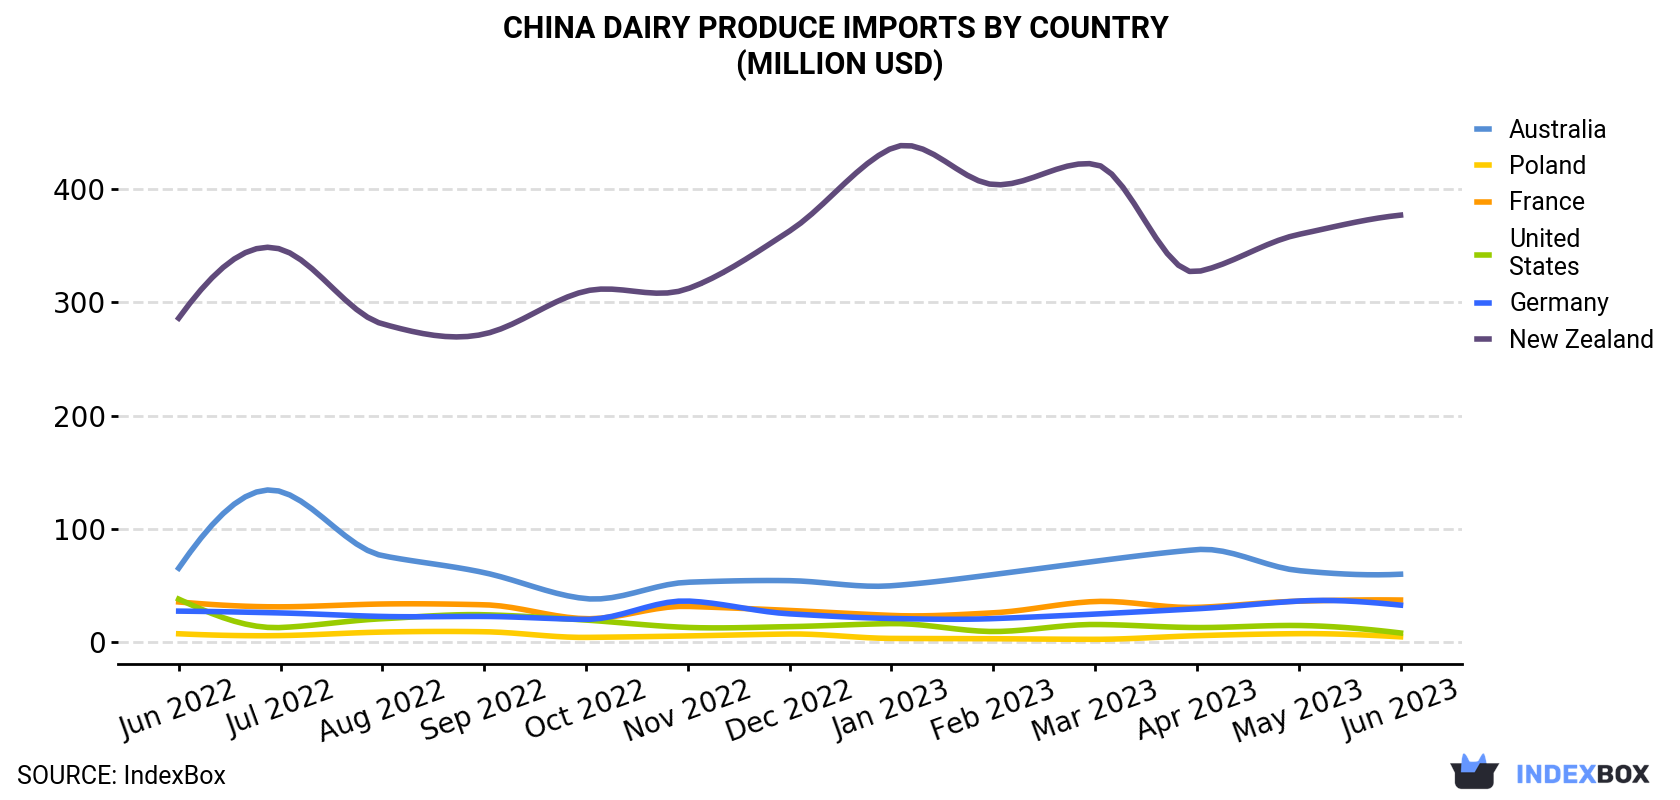 China Dairy Produce Imports By Country (Million USD)